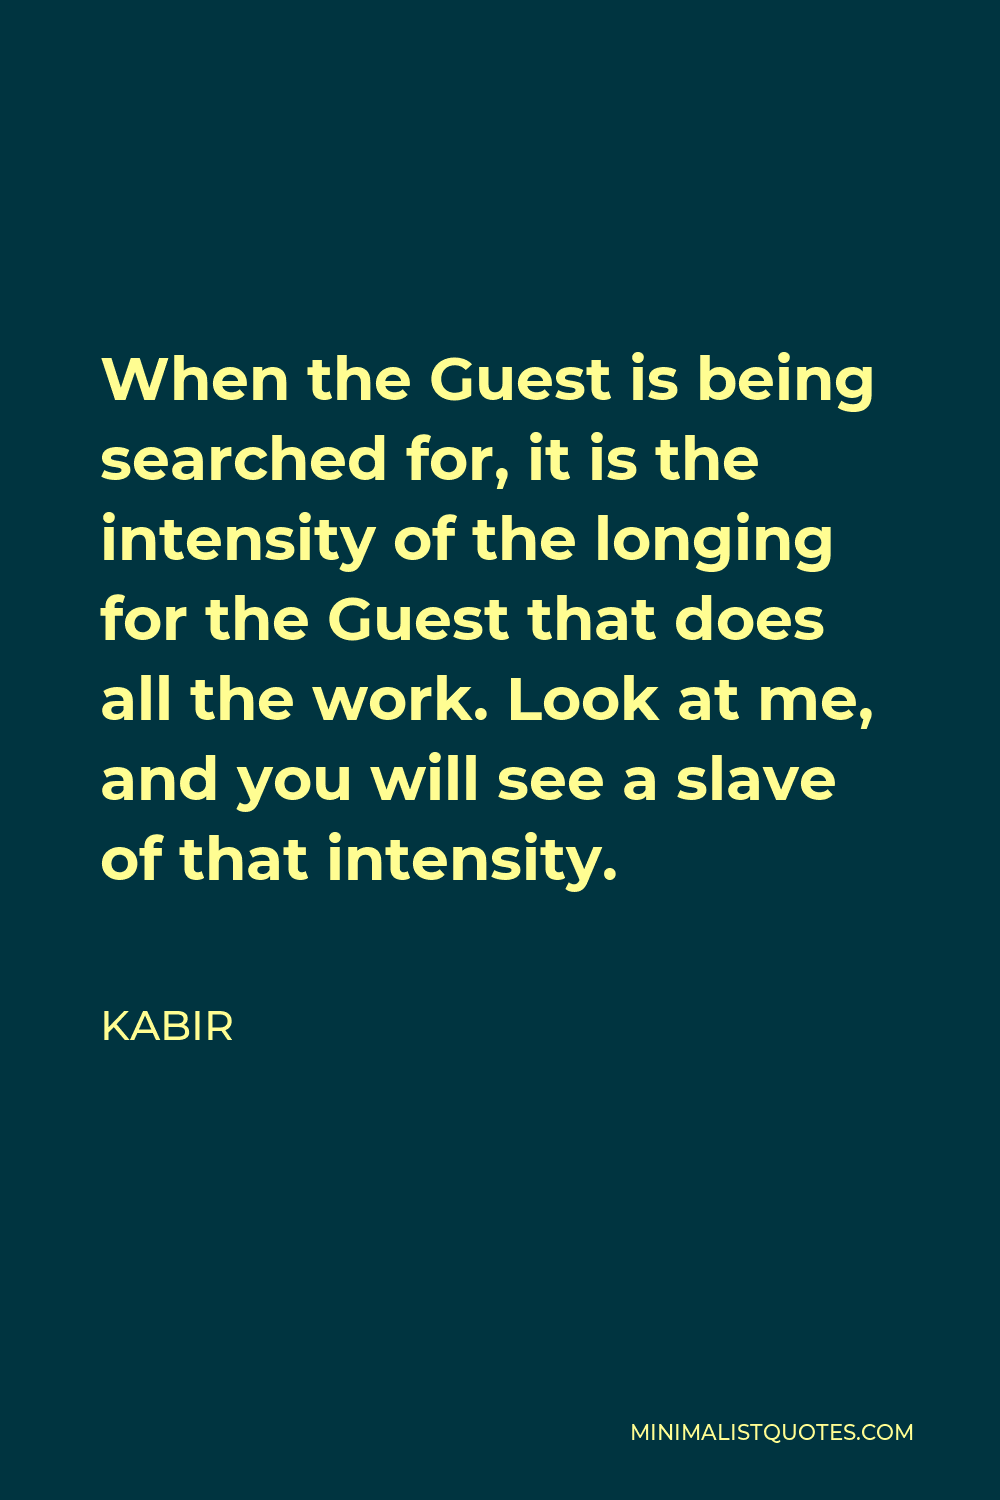 Kabir Quote - When the Guest is being searched for, it is the intensity of the longing for the Guest that does all the work. Look at me, and you will see a slave of that intensity.